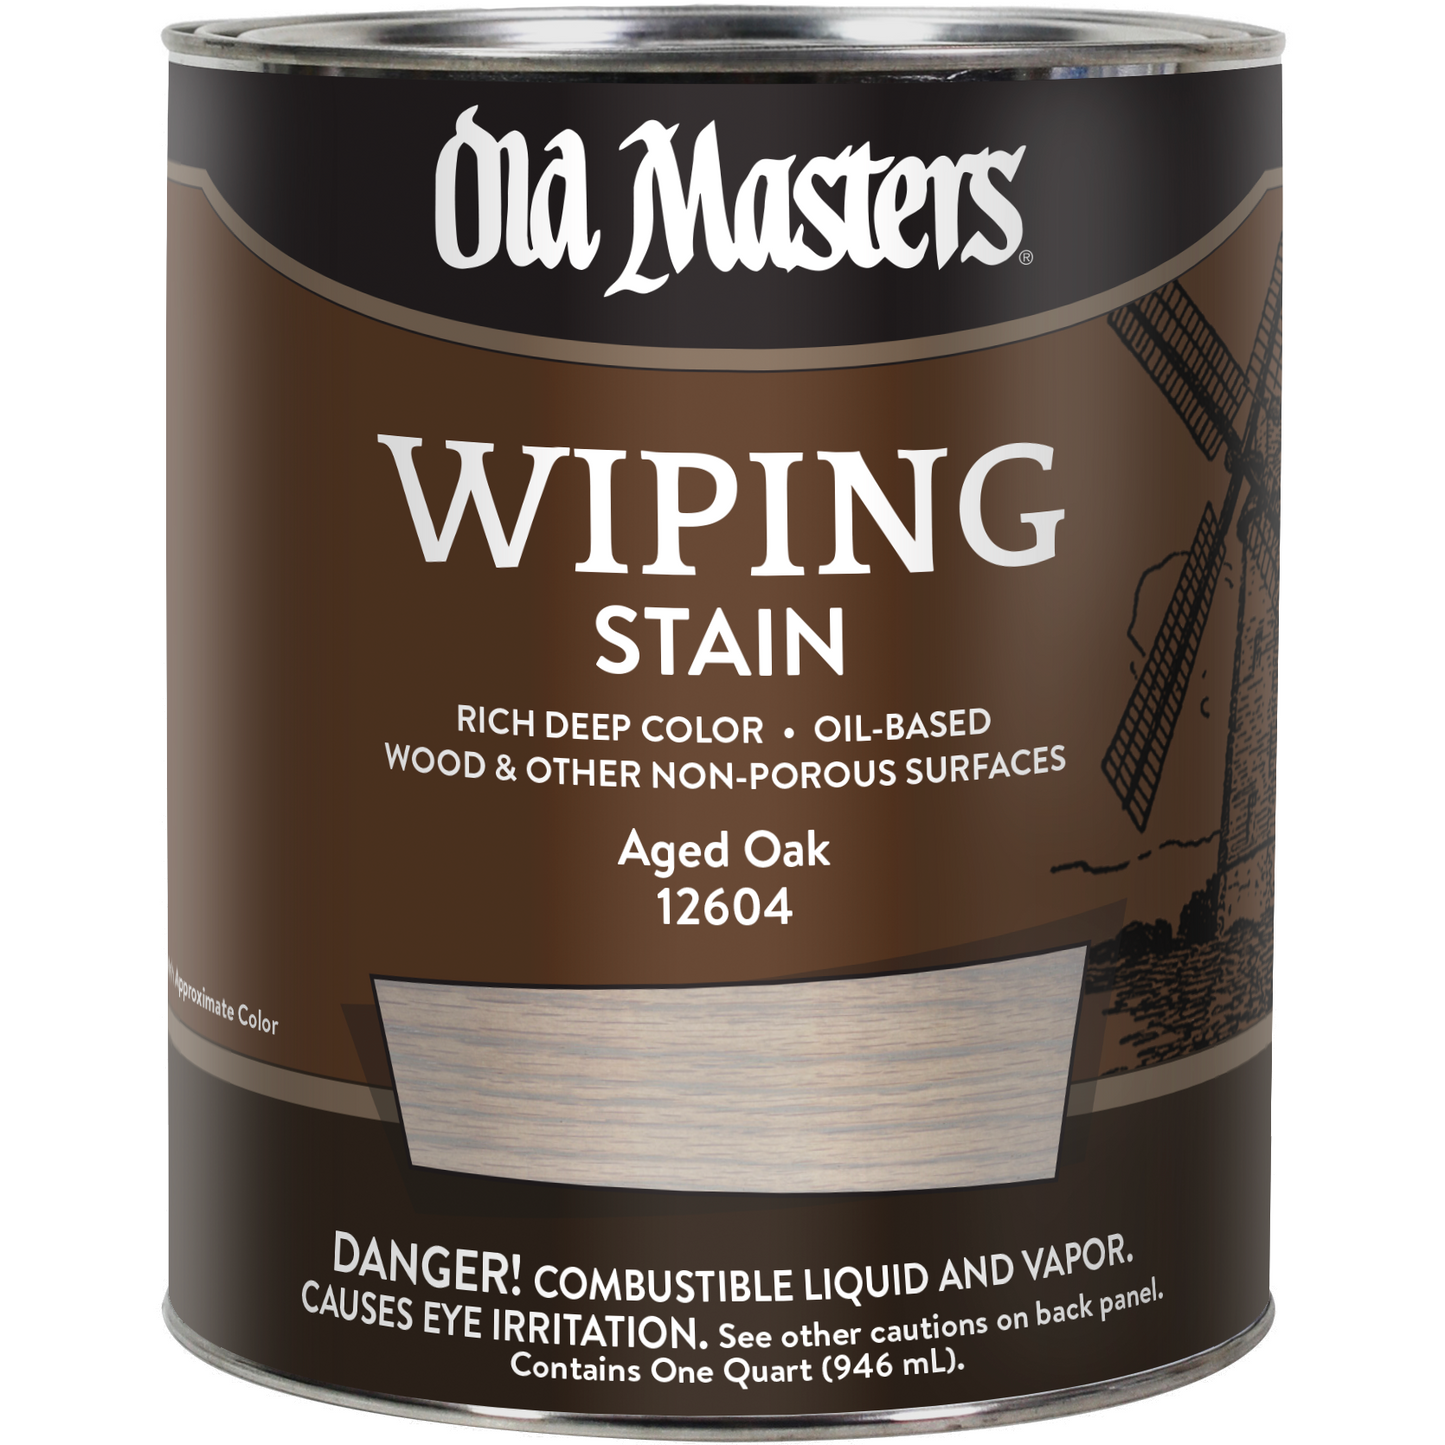 Old Masters Wiping Stain - Aged Oak